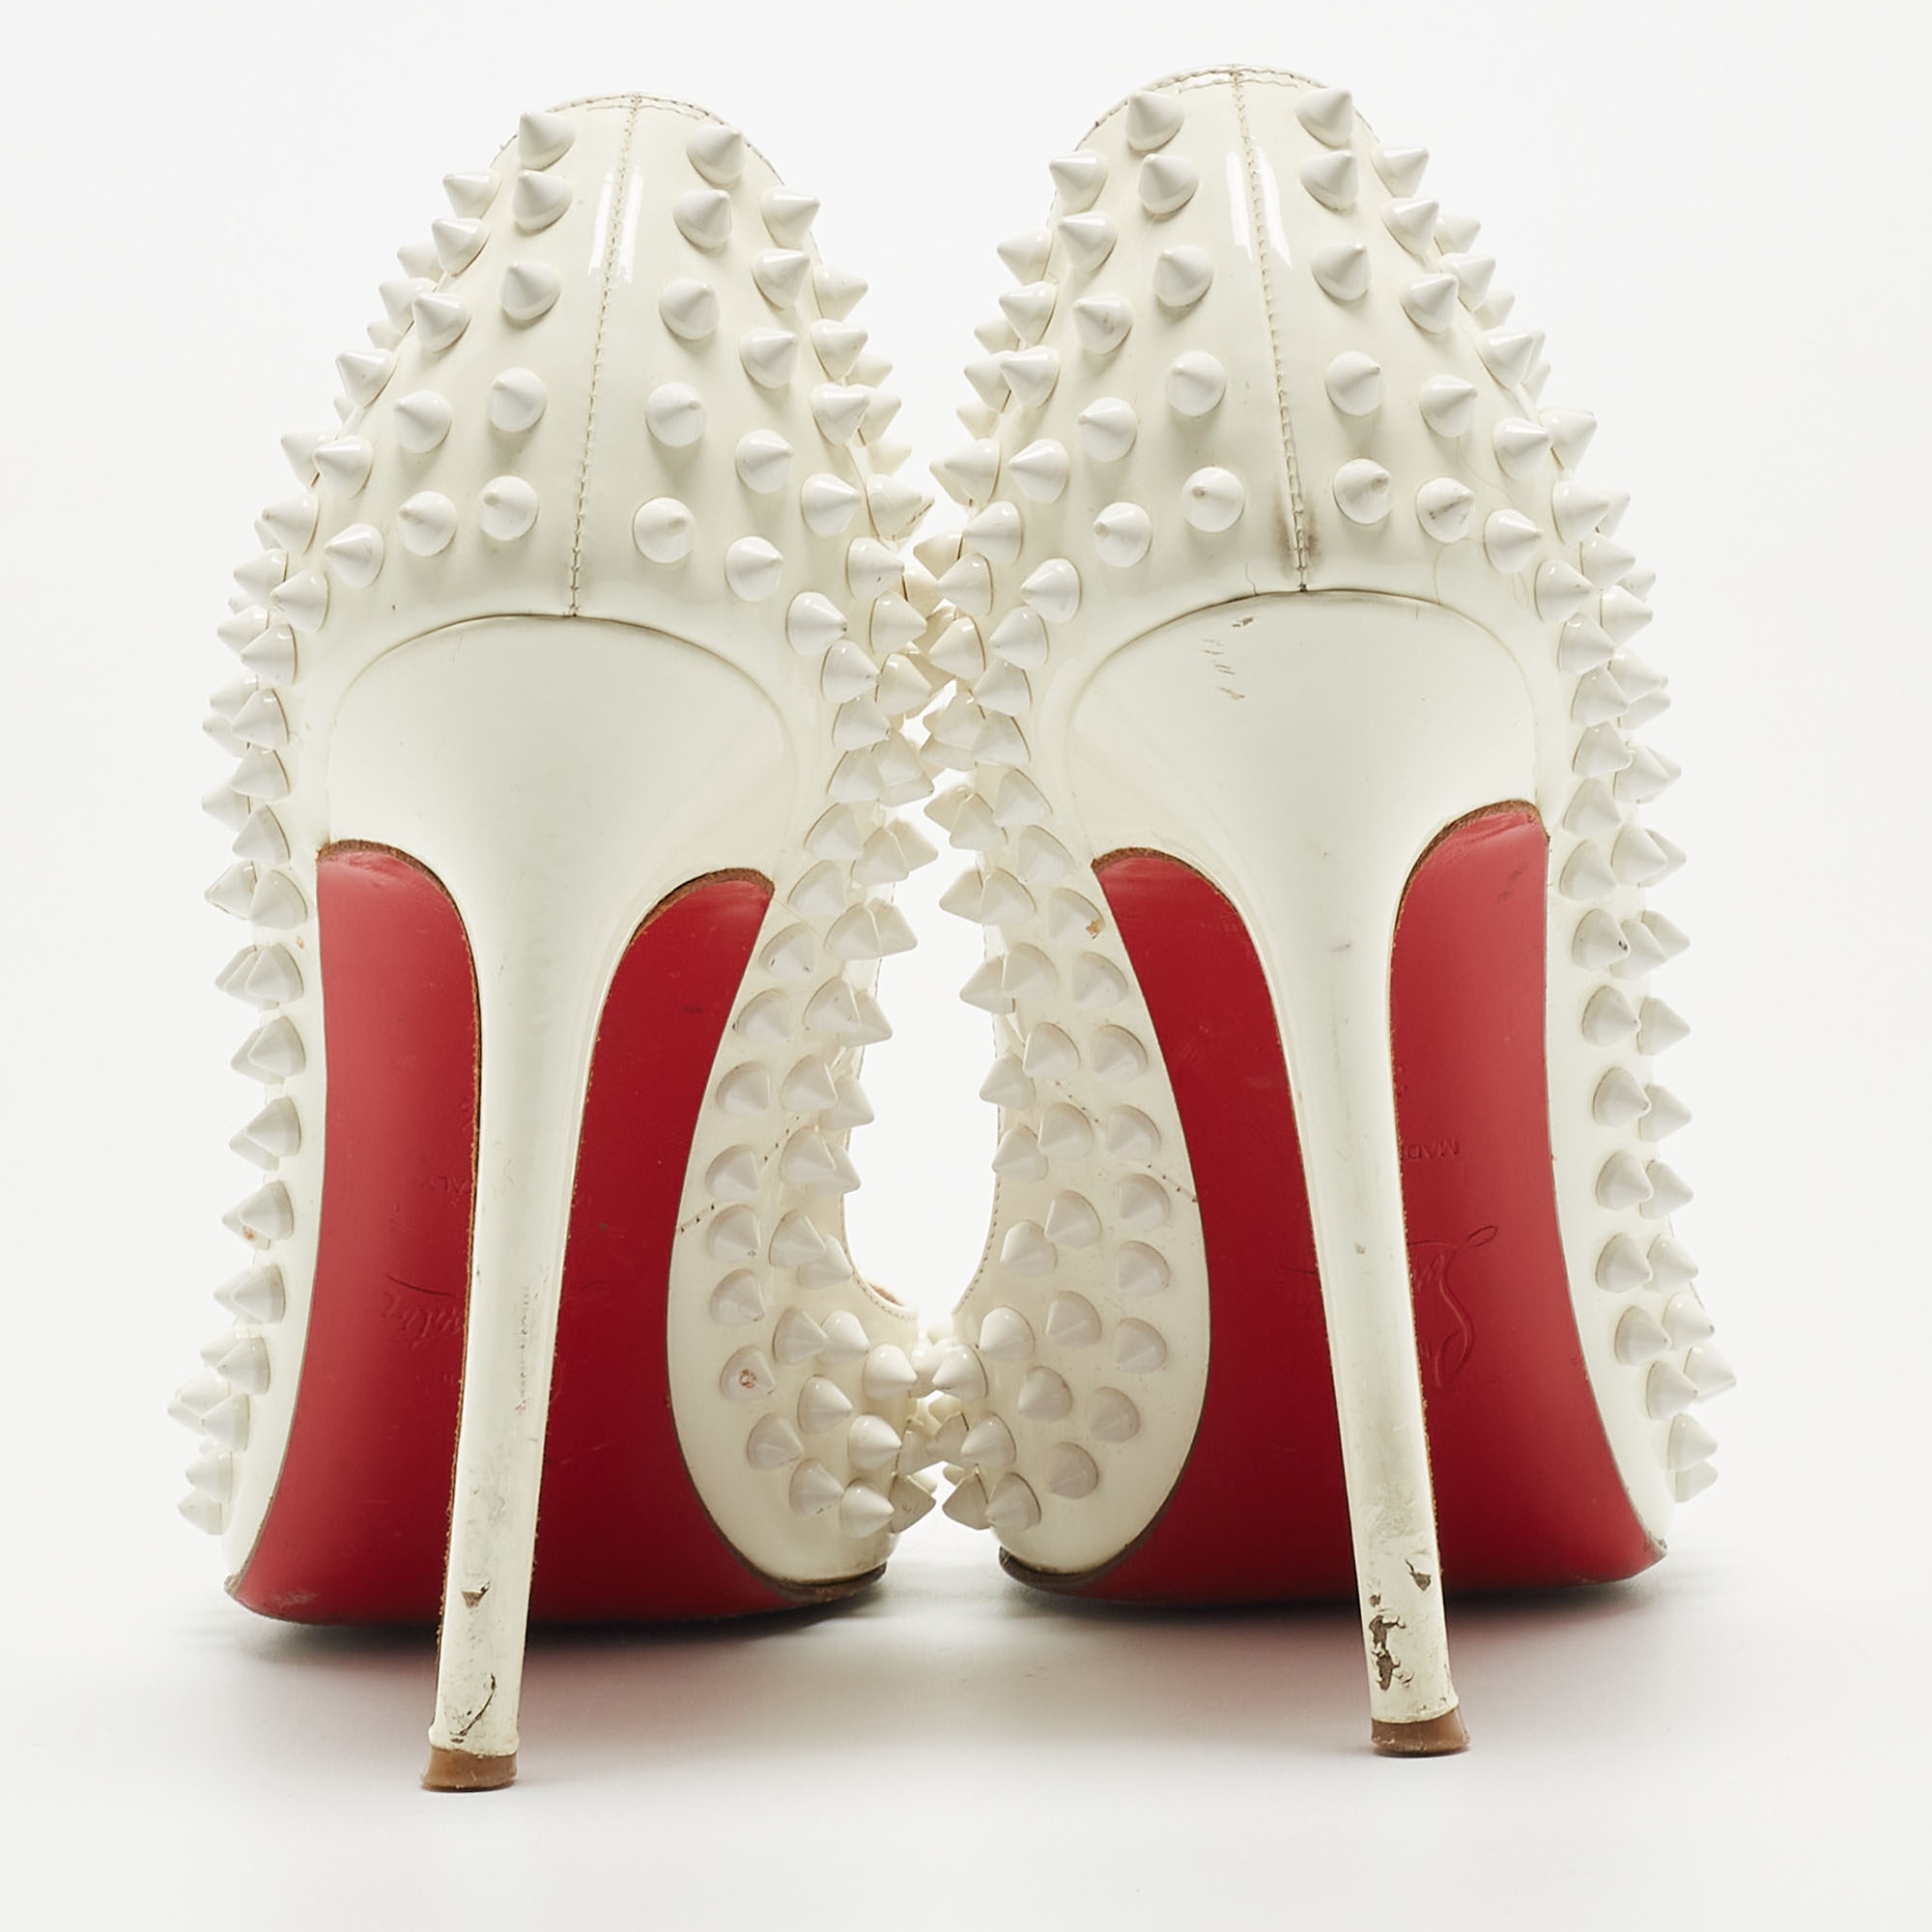 Christian Louboutin White Patent Leather Pigalle Spikes Pumps Size 37.5